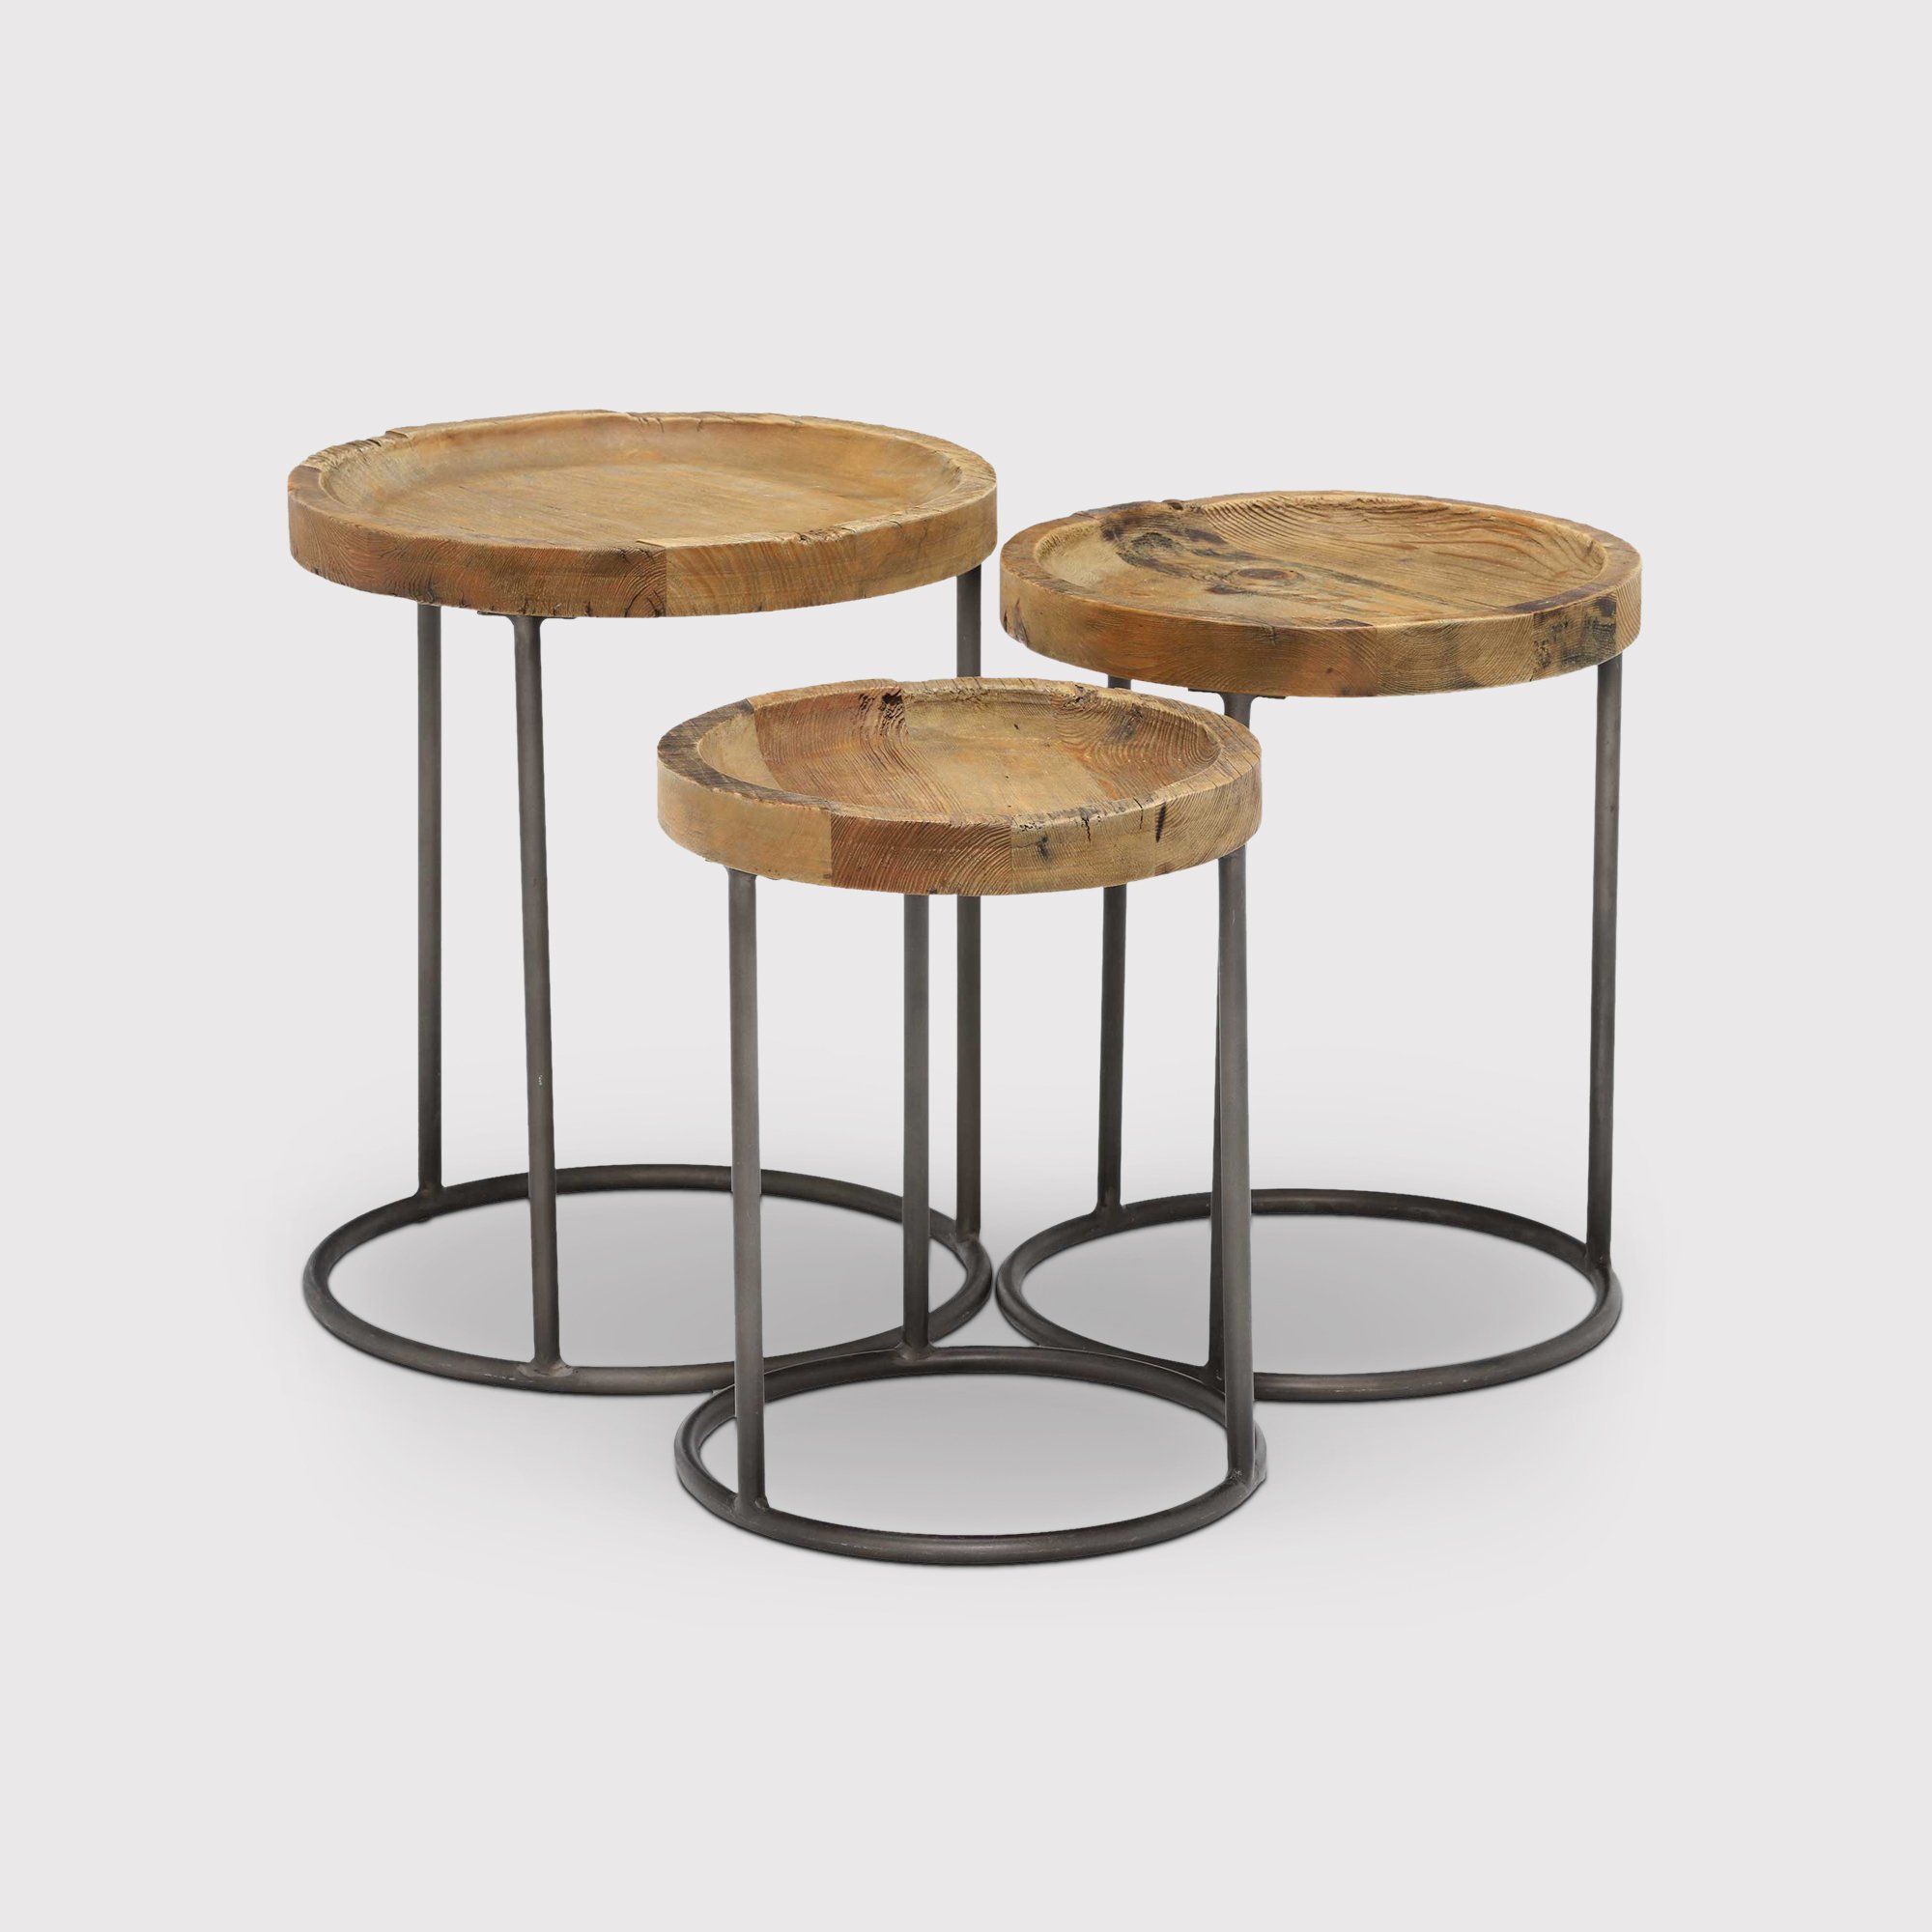 Keeler Set Of 3 Round Tables, Round, Brown | Barker & Stonehouse